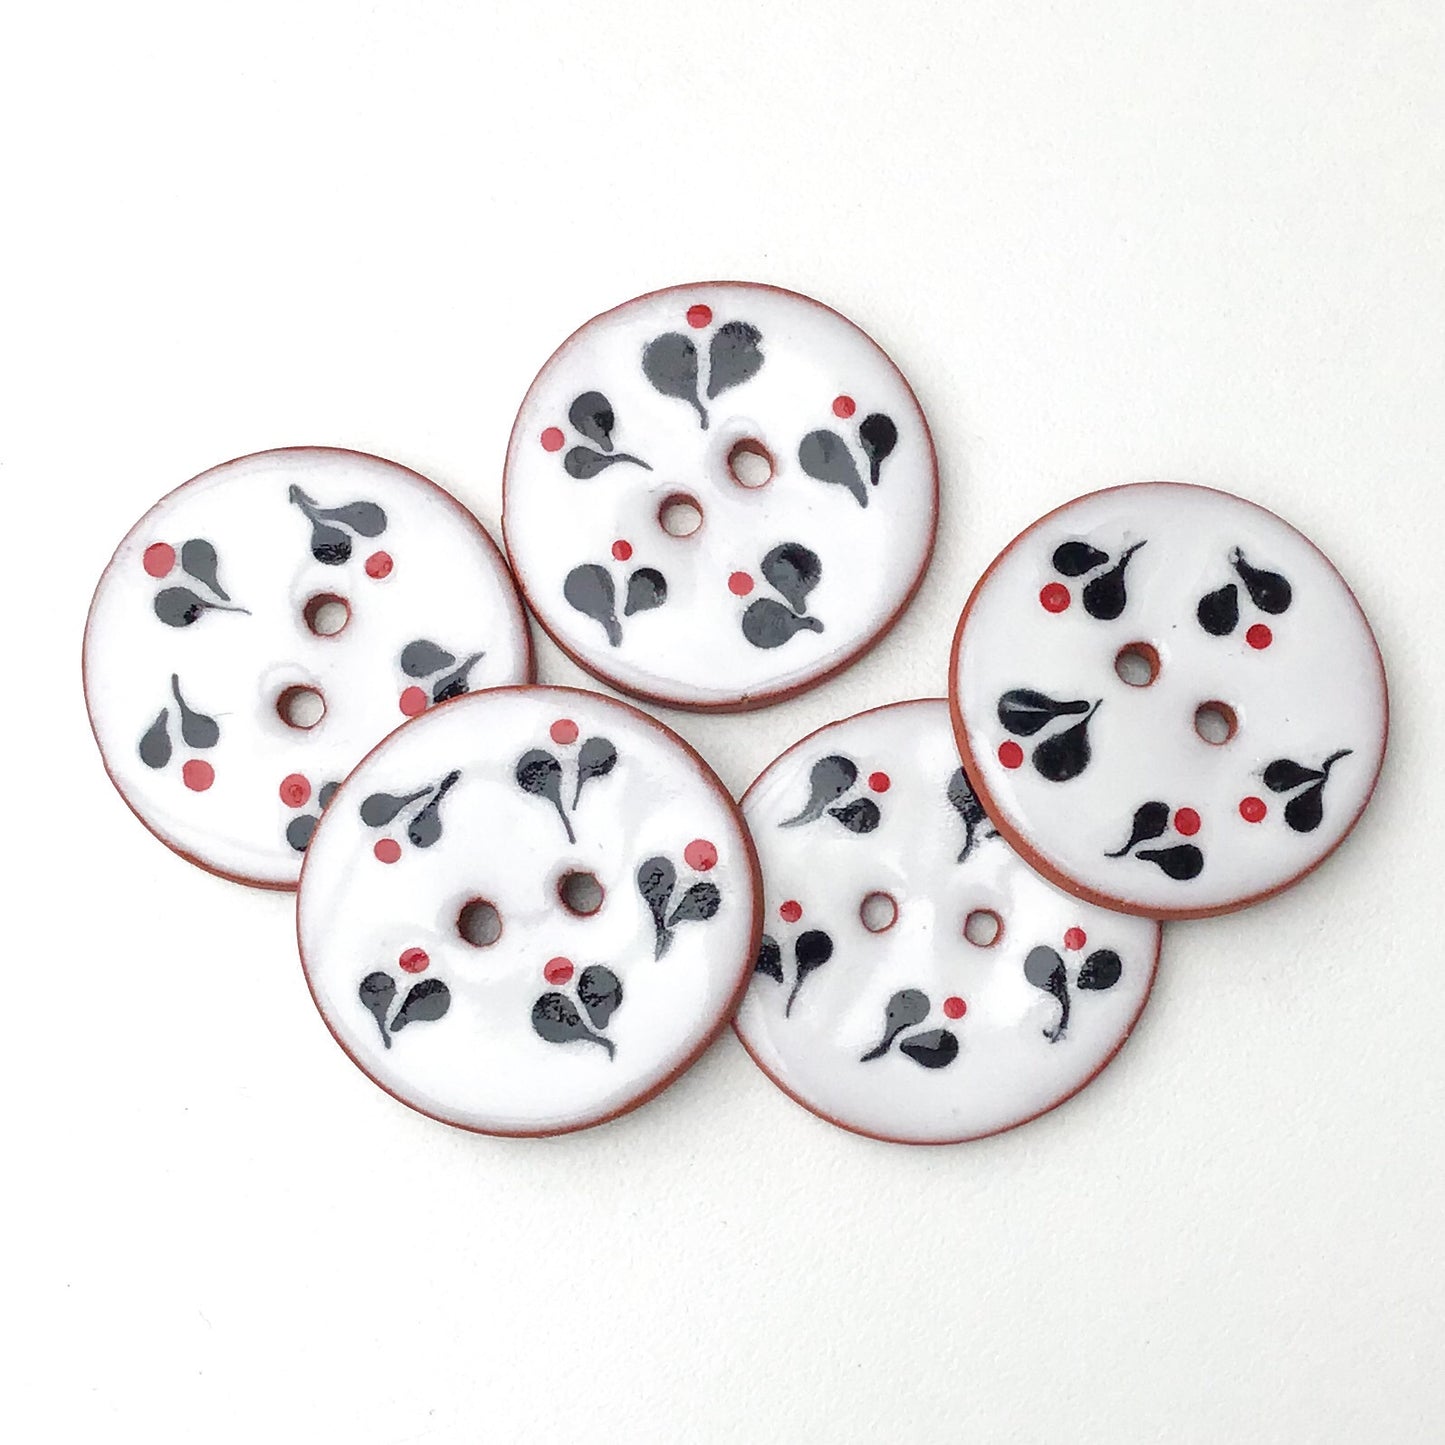 Decorative Ceramic Button with Small Floral Print - Red - Black - White Clay Buttons - 1 1/16" (ws-66)